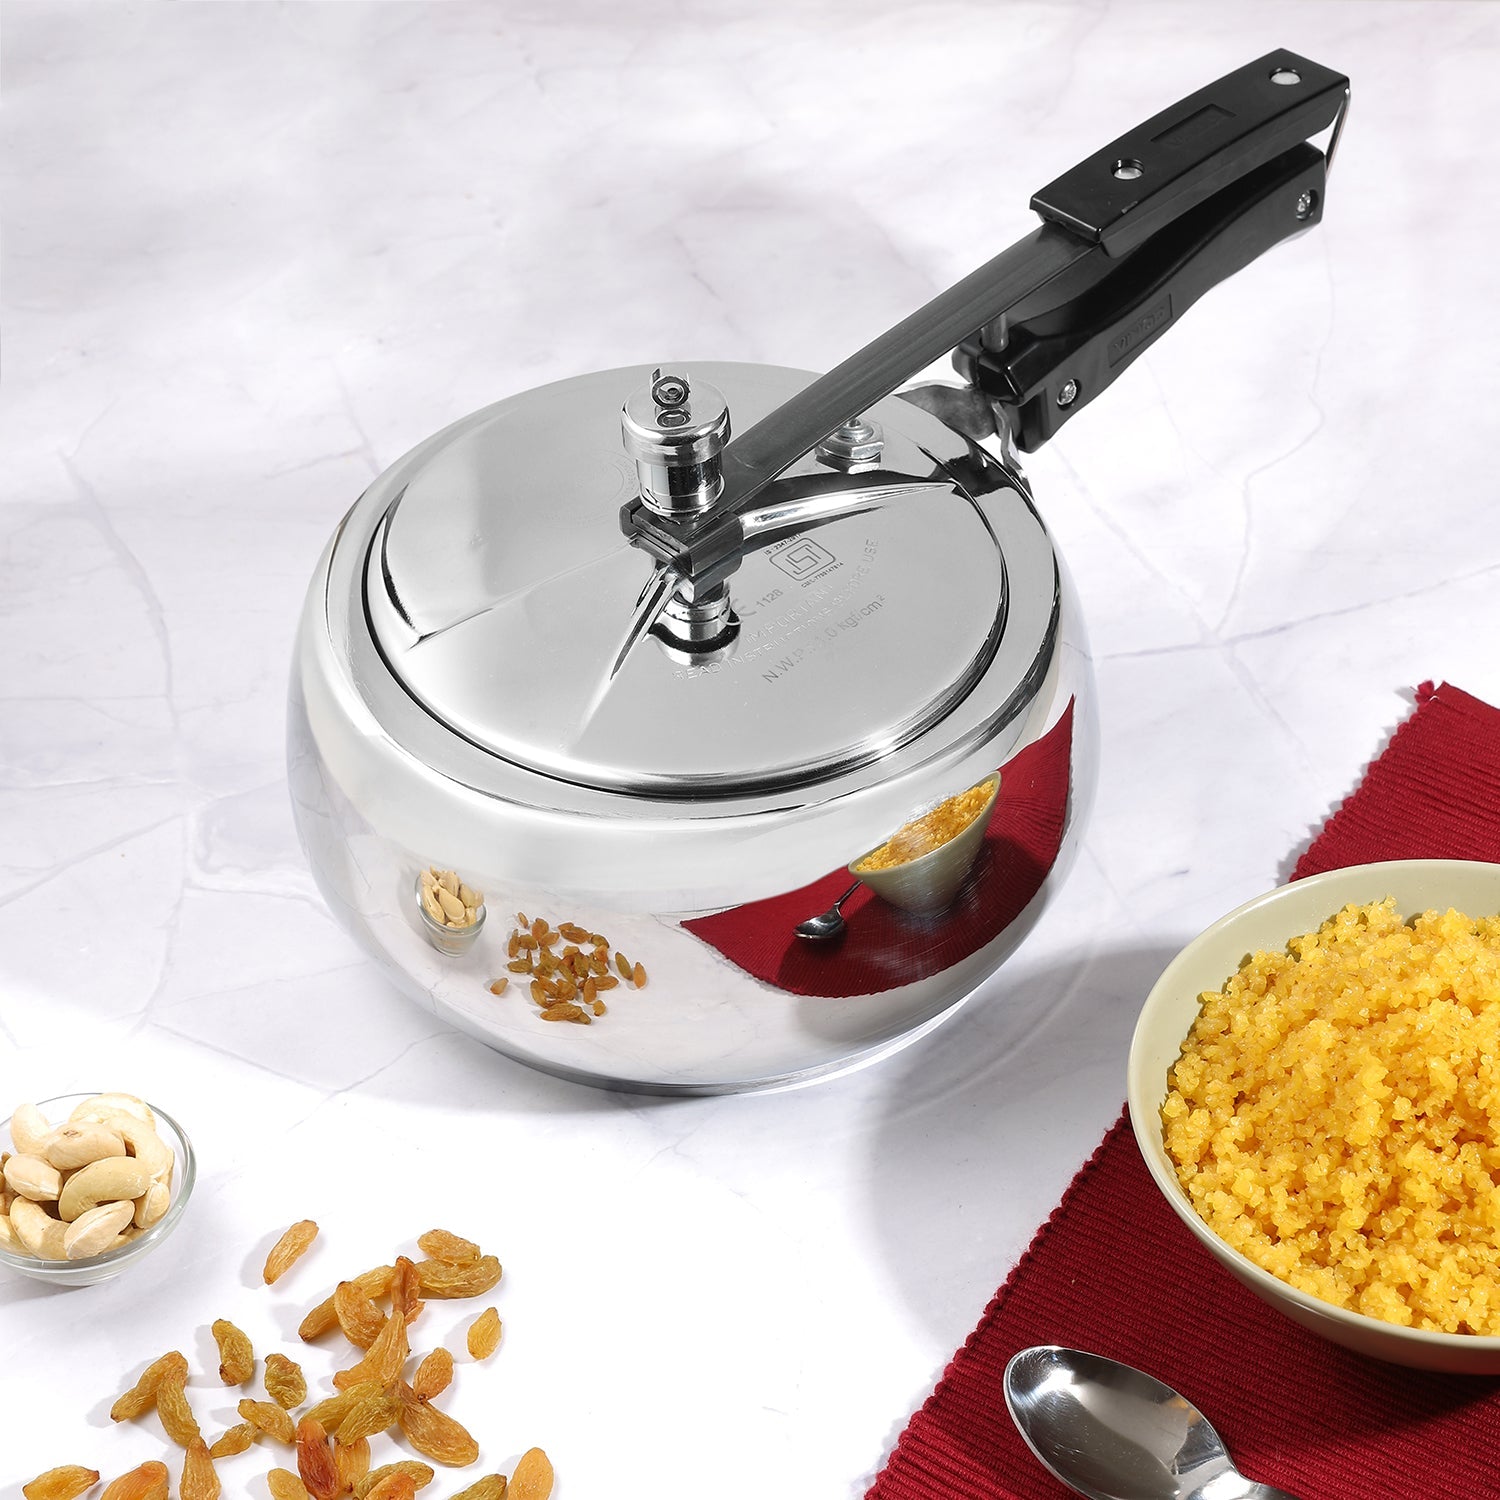 Vinod Europa Stainless Steel Handi Shape Inner Lid Pressure Cooker (Induction - Friendly) next to a bowl of sheera